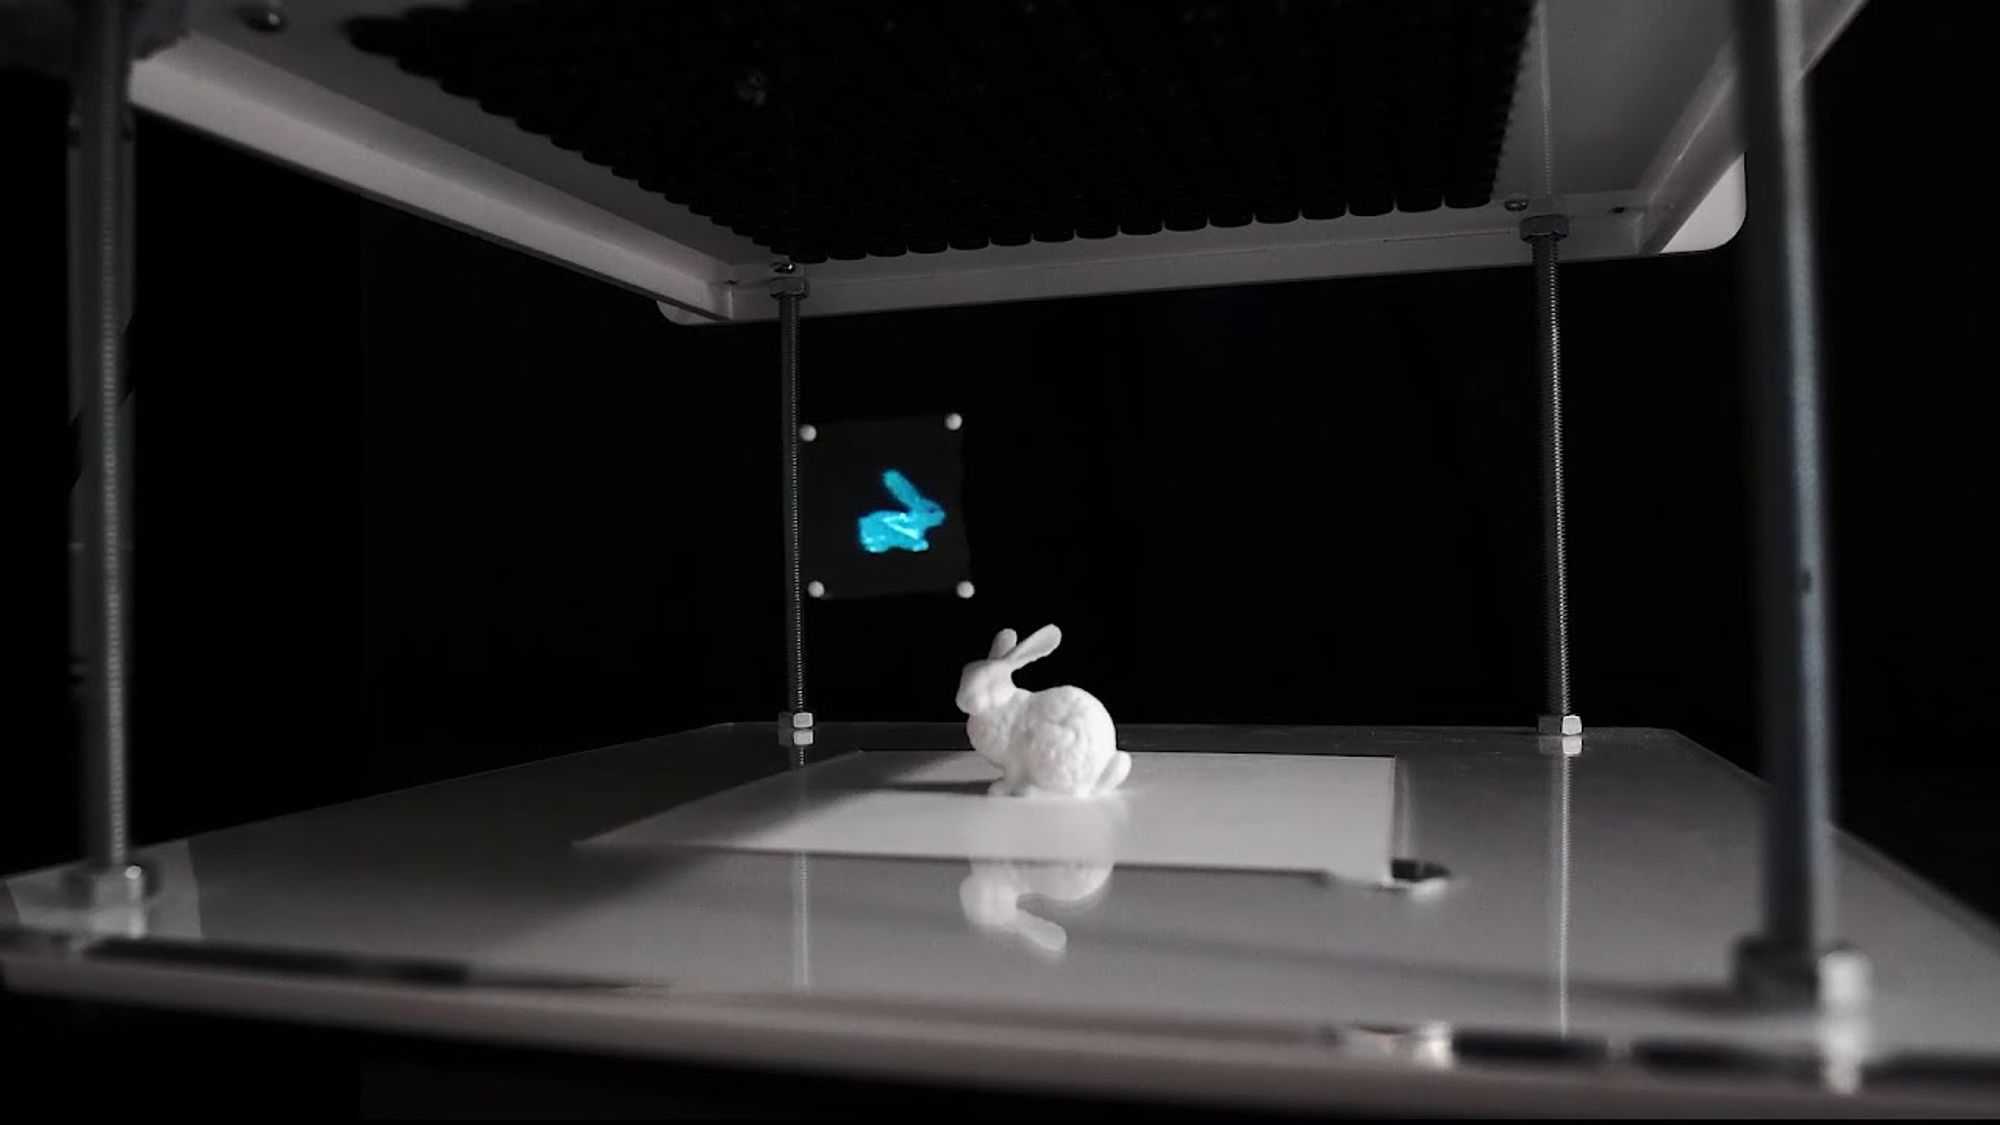 High-speed acoustic holography with arbitrary scattering objects. Levitation over obstacles! 1/3